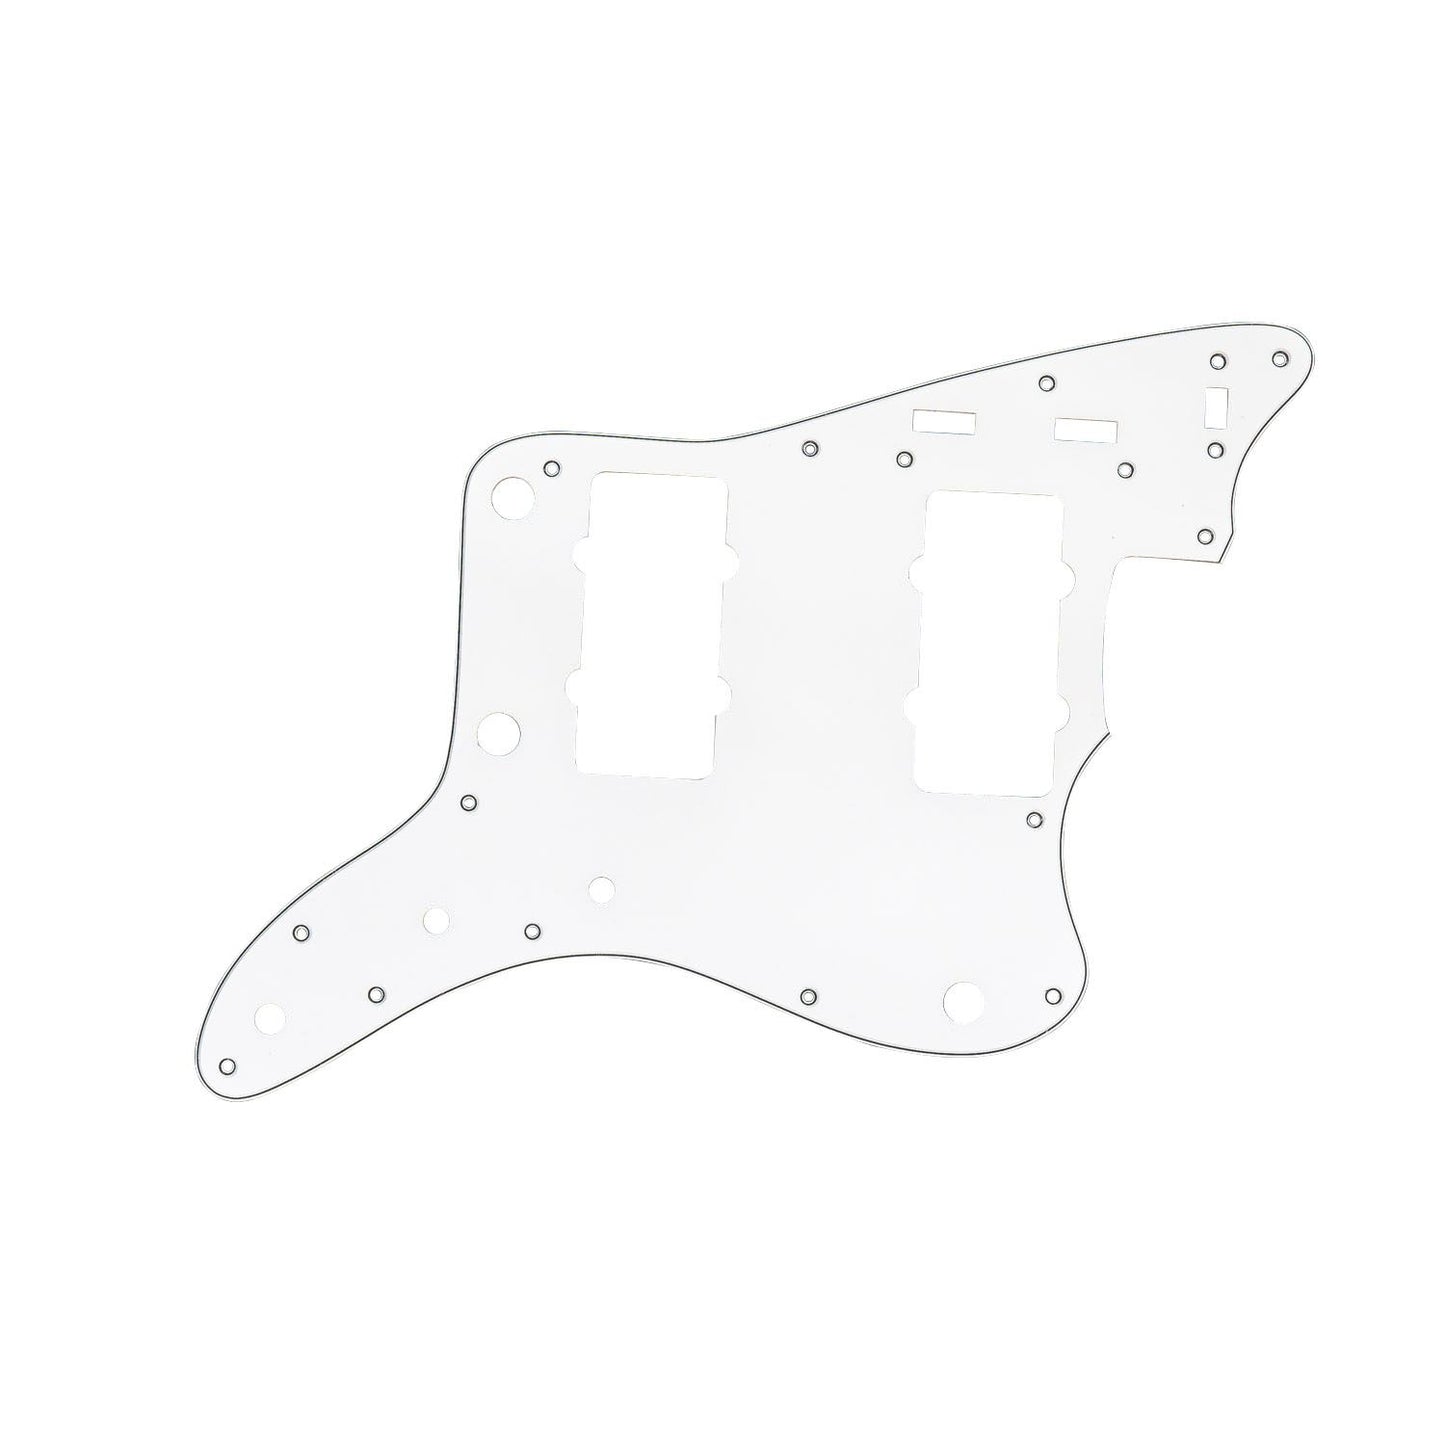 Jazzmaster Compatible Pickguard 3-ply White